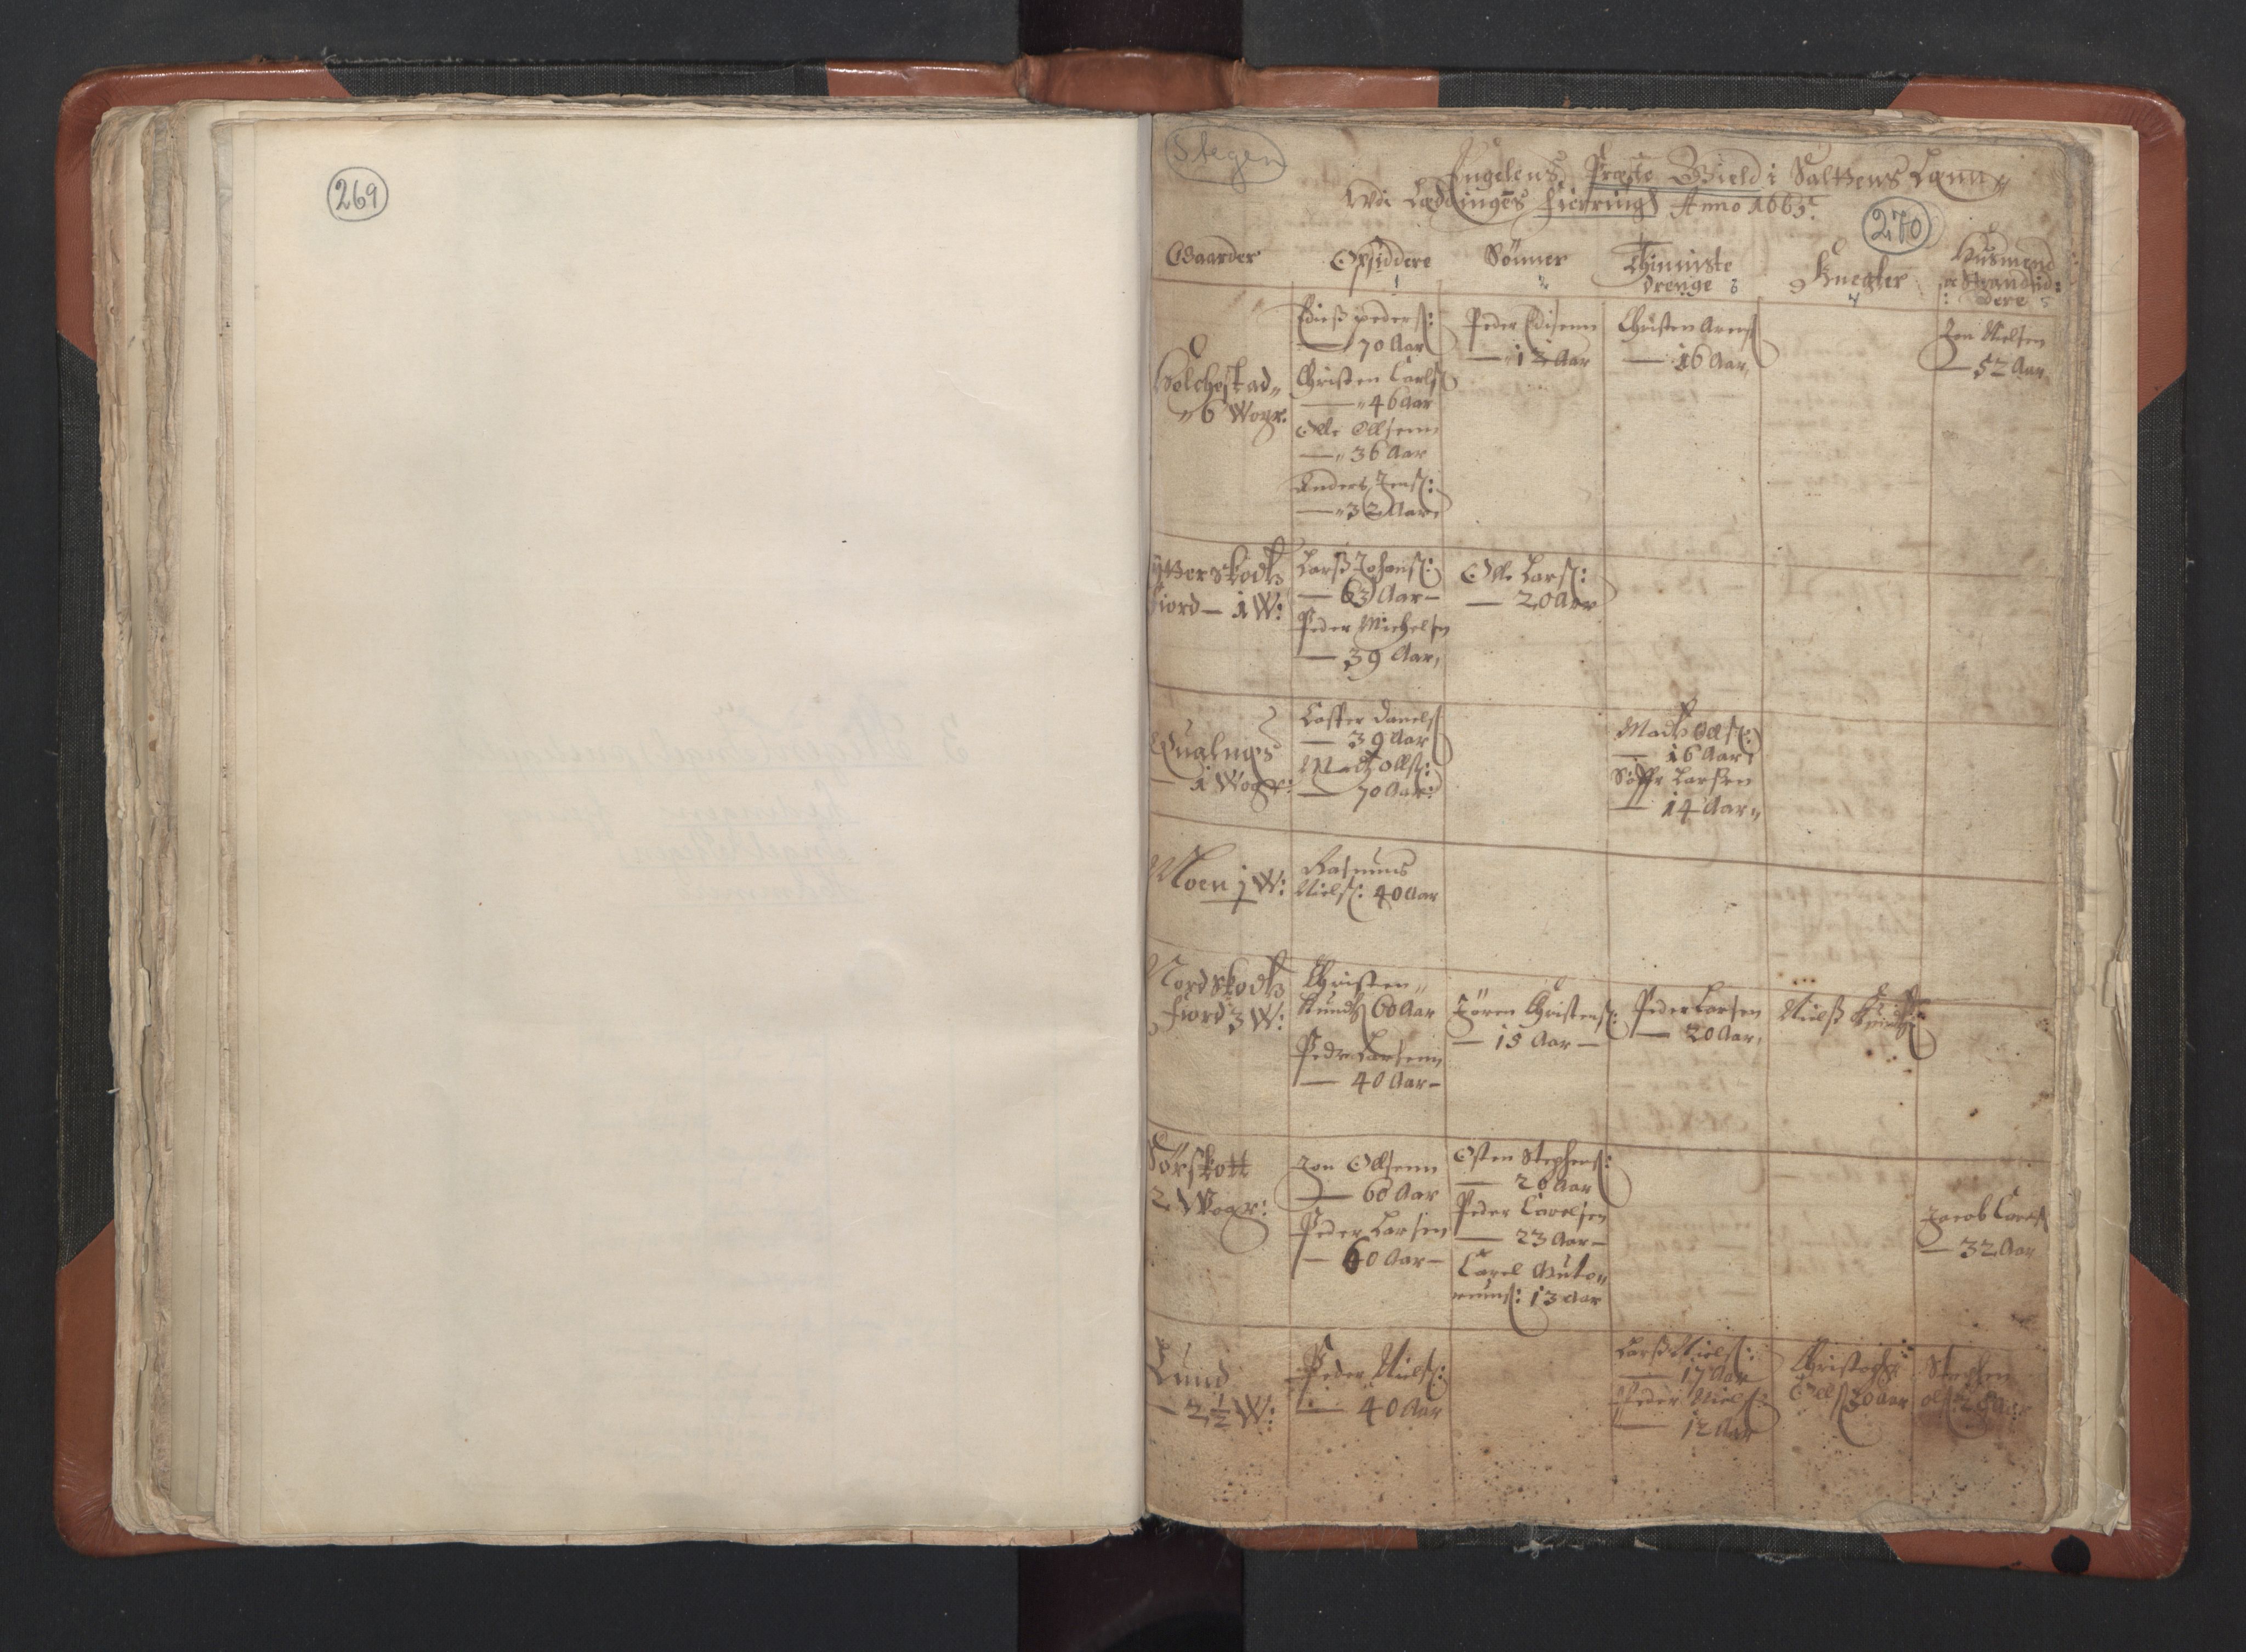 RA, Vicar's Census 1664-1666, no. 35: Helgeland deanery and Salten deanery, 1664-1666, p. 269-270